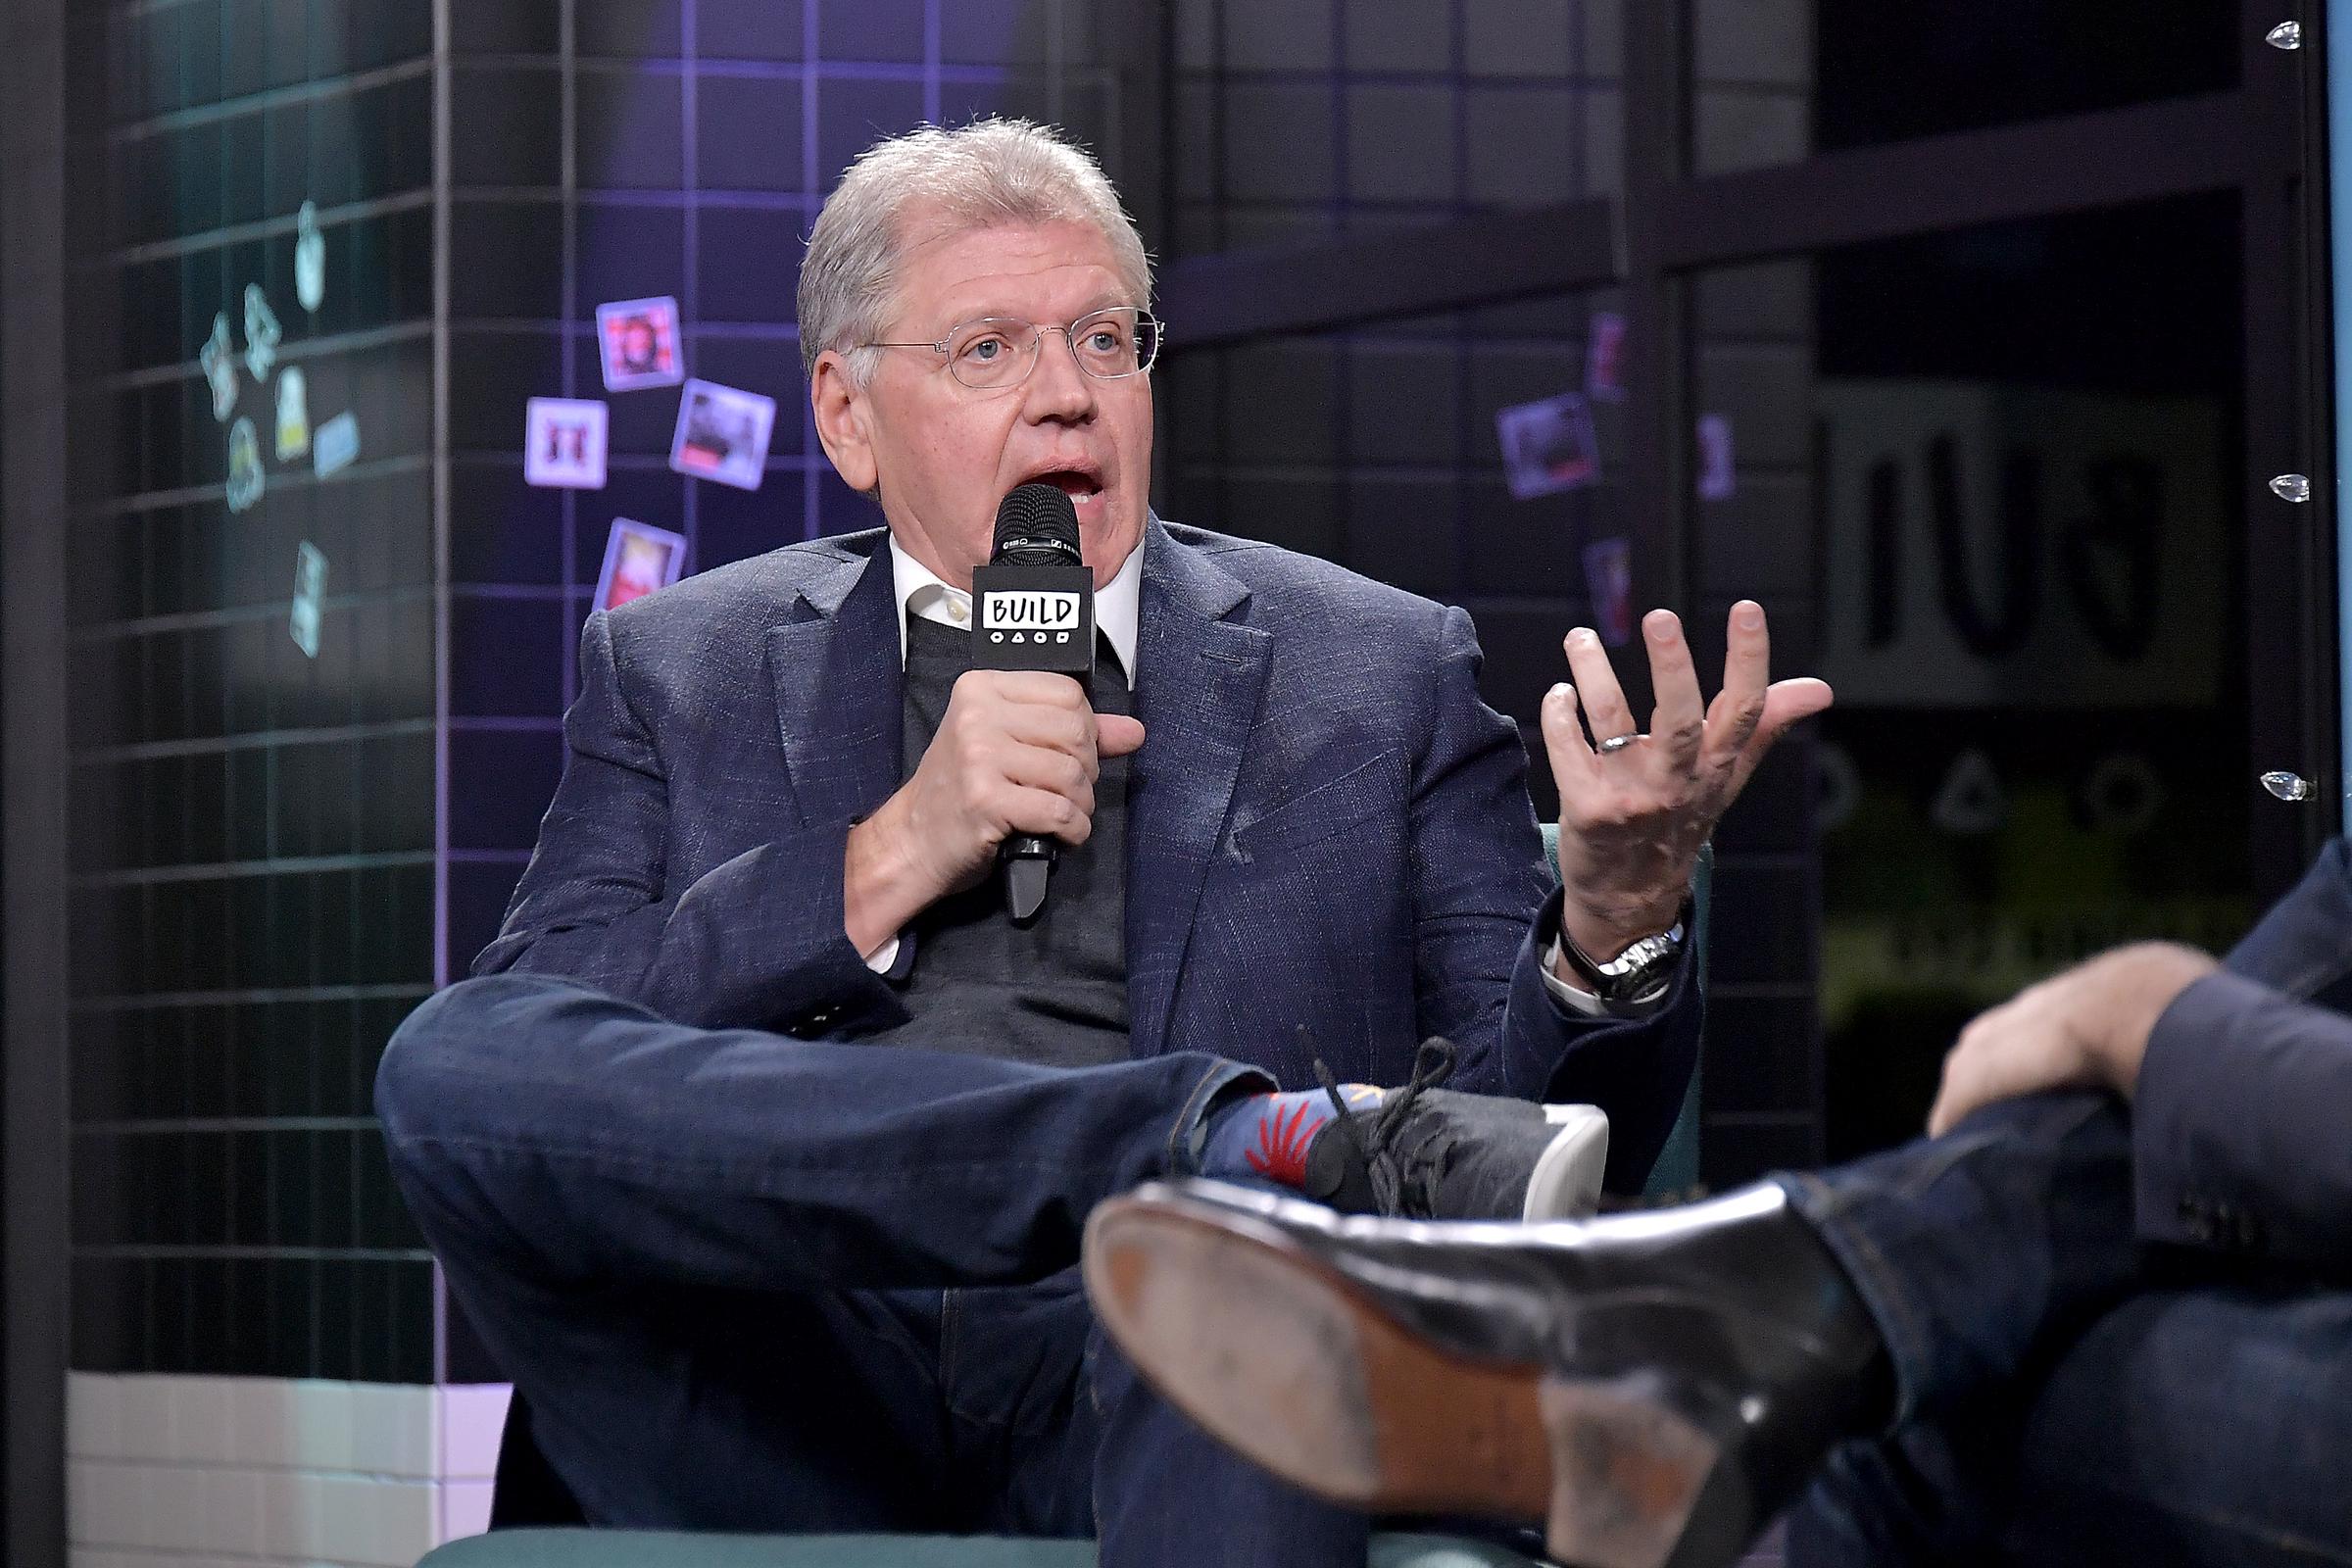 Robert Zemeckis engages in a discussion at Build Studio, New York City on December 19, 2018. | Source: Getty Images